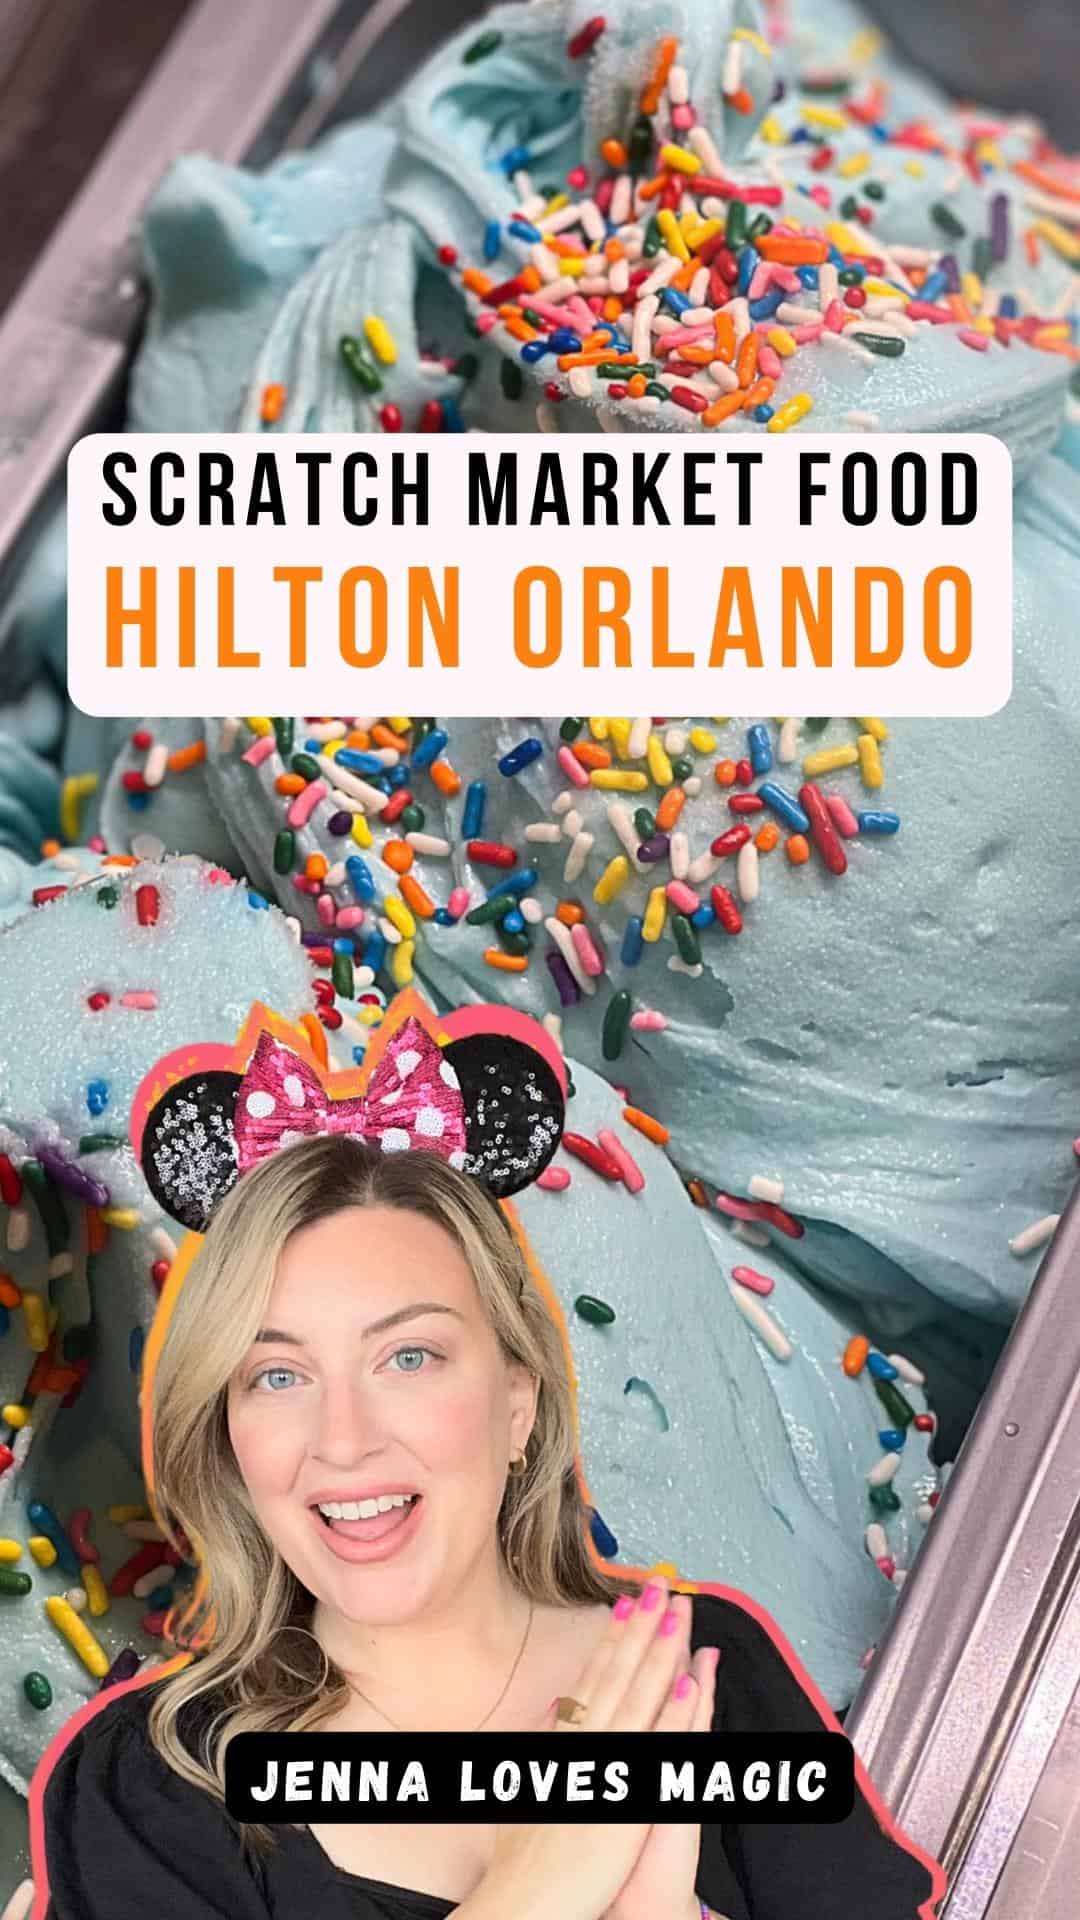 Restaurant Scratch Market at Hilton Orlando on Destination Parkway with text overlay and logo for Jenna Loves Magic